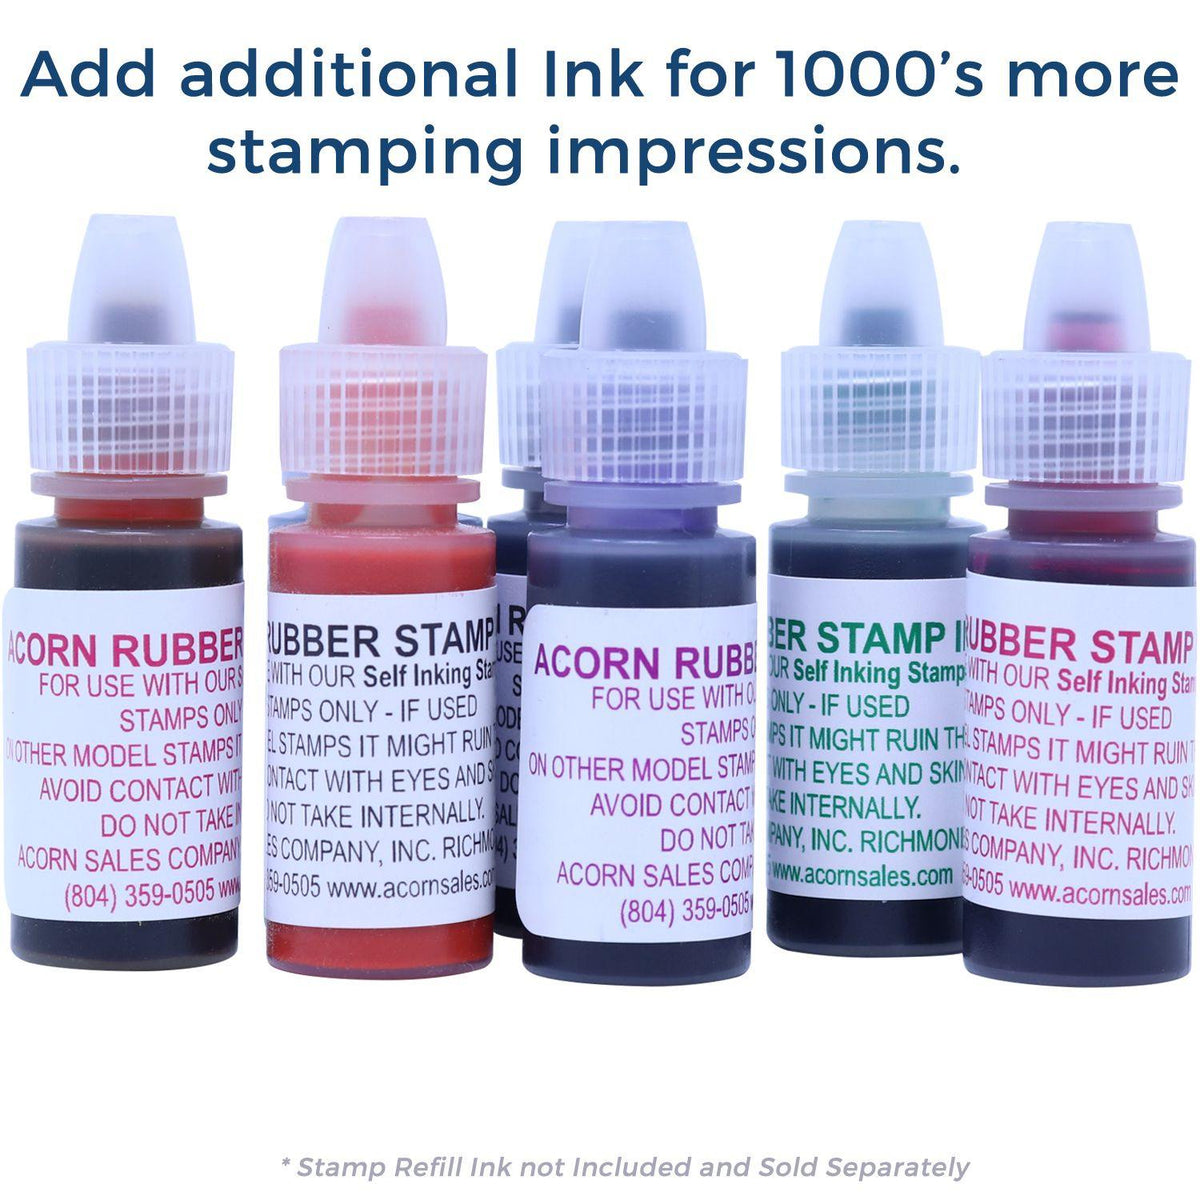 Refill Inks for Large Pre-Inked Entered with Mouse Stamp Available